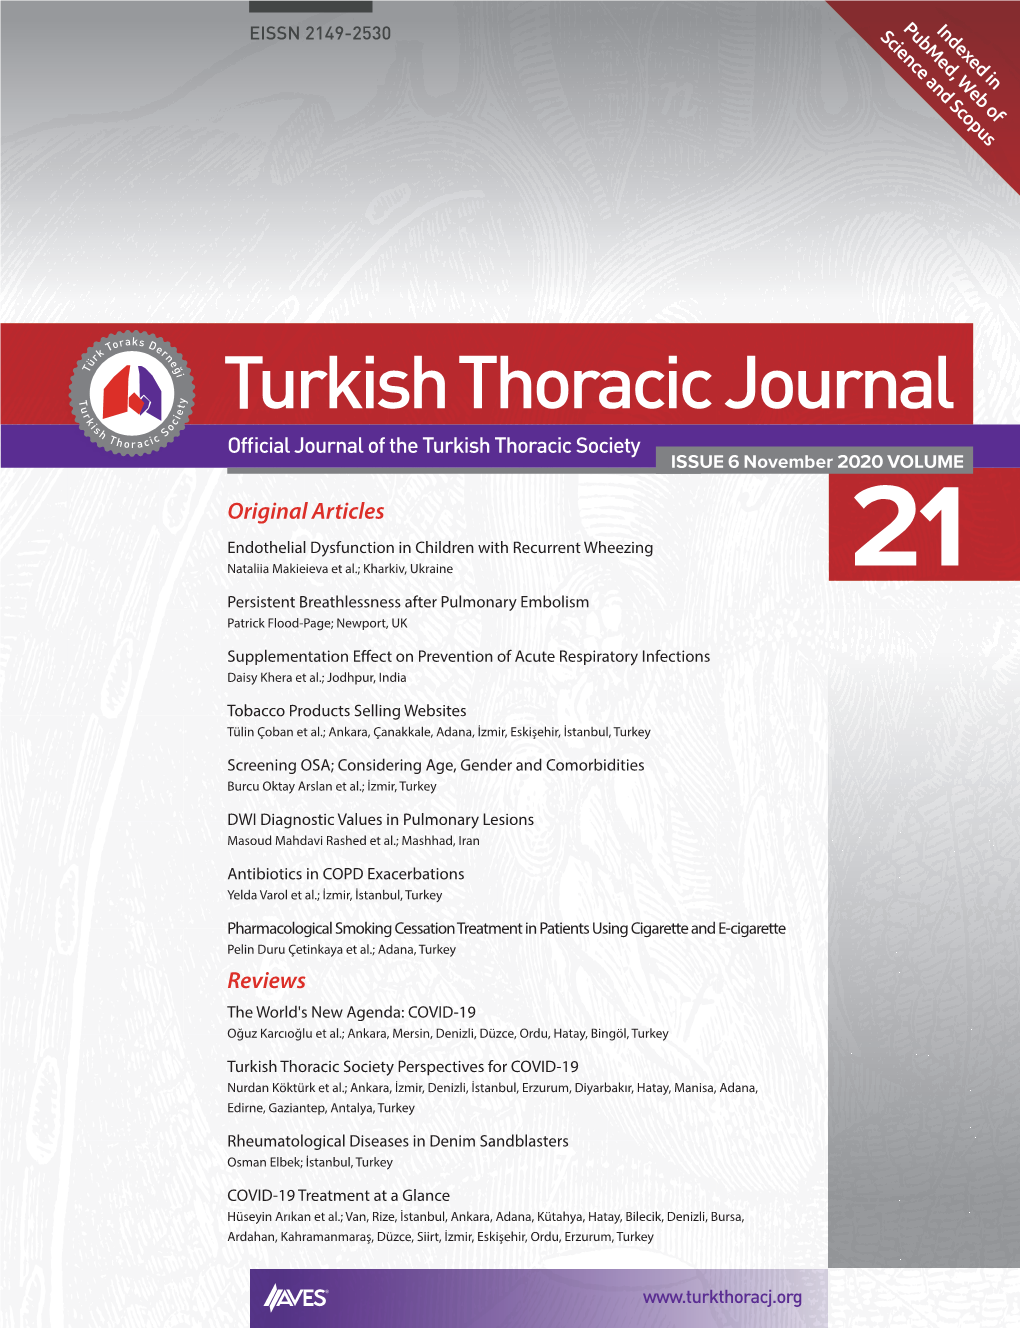 Covered by the Turkish Thoracic Society